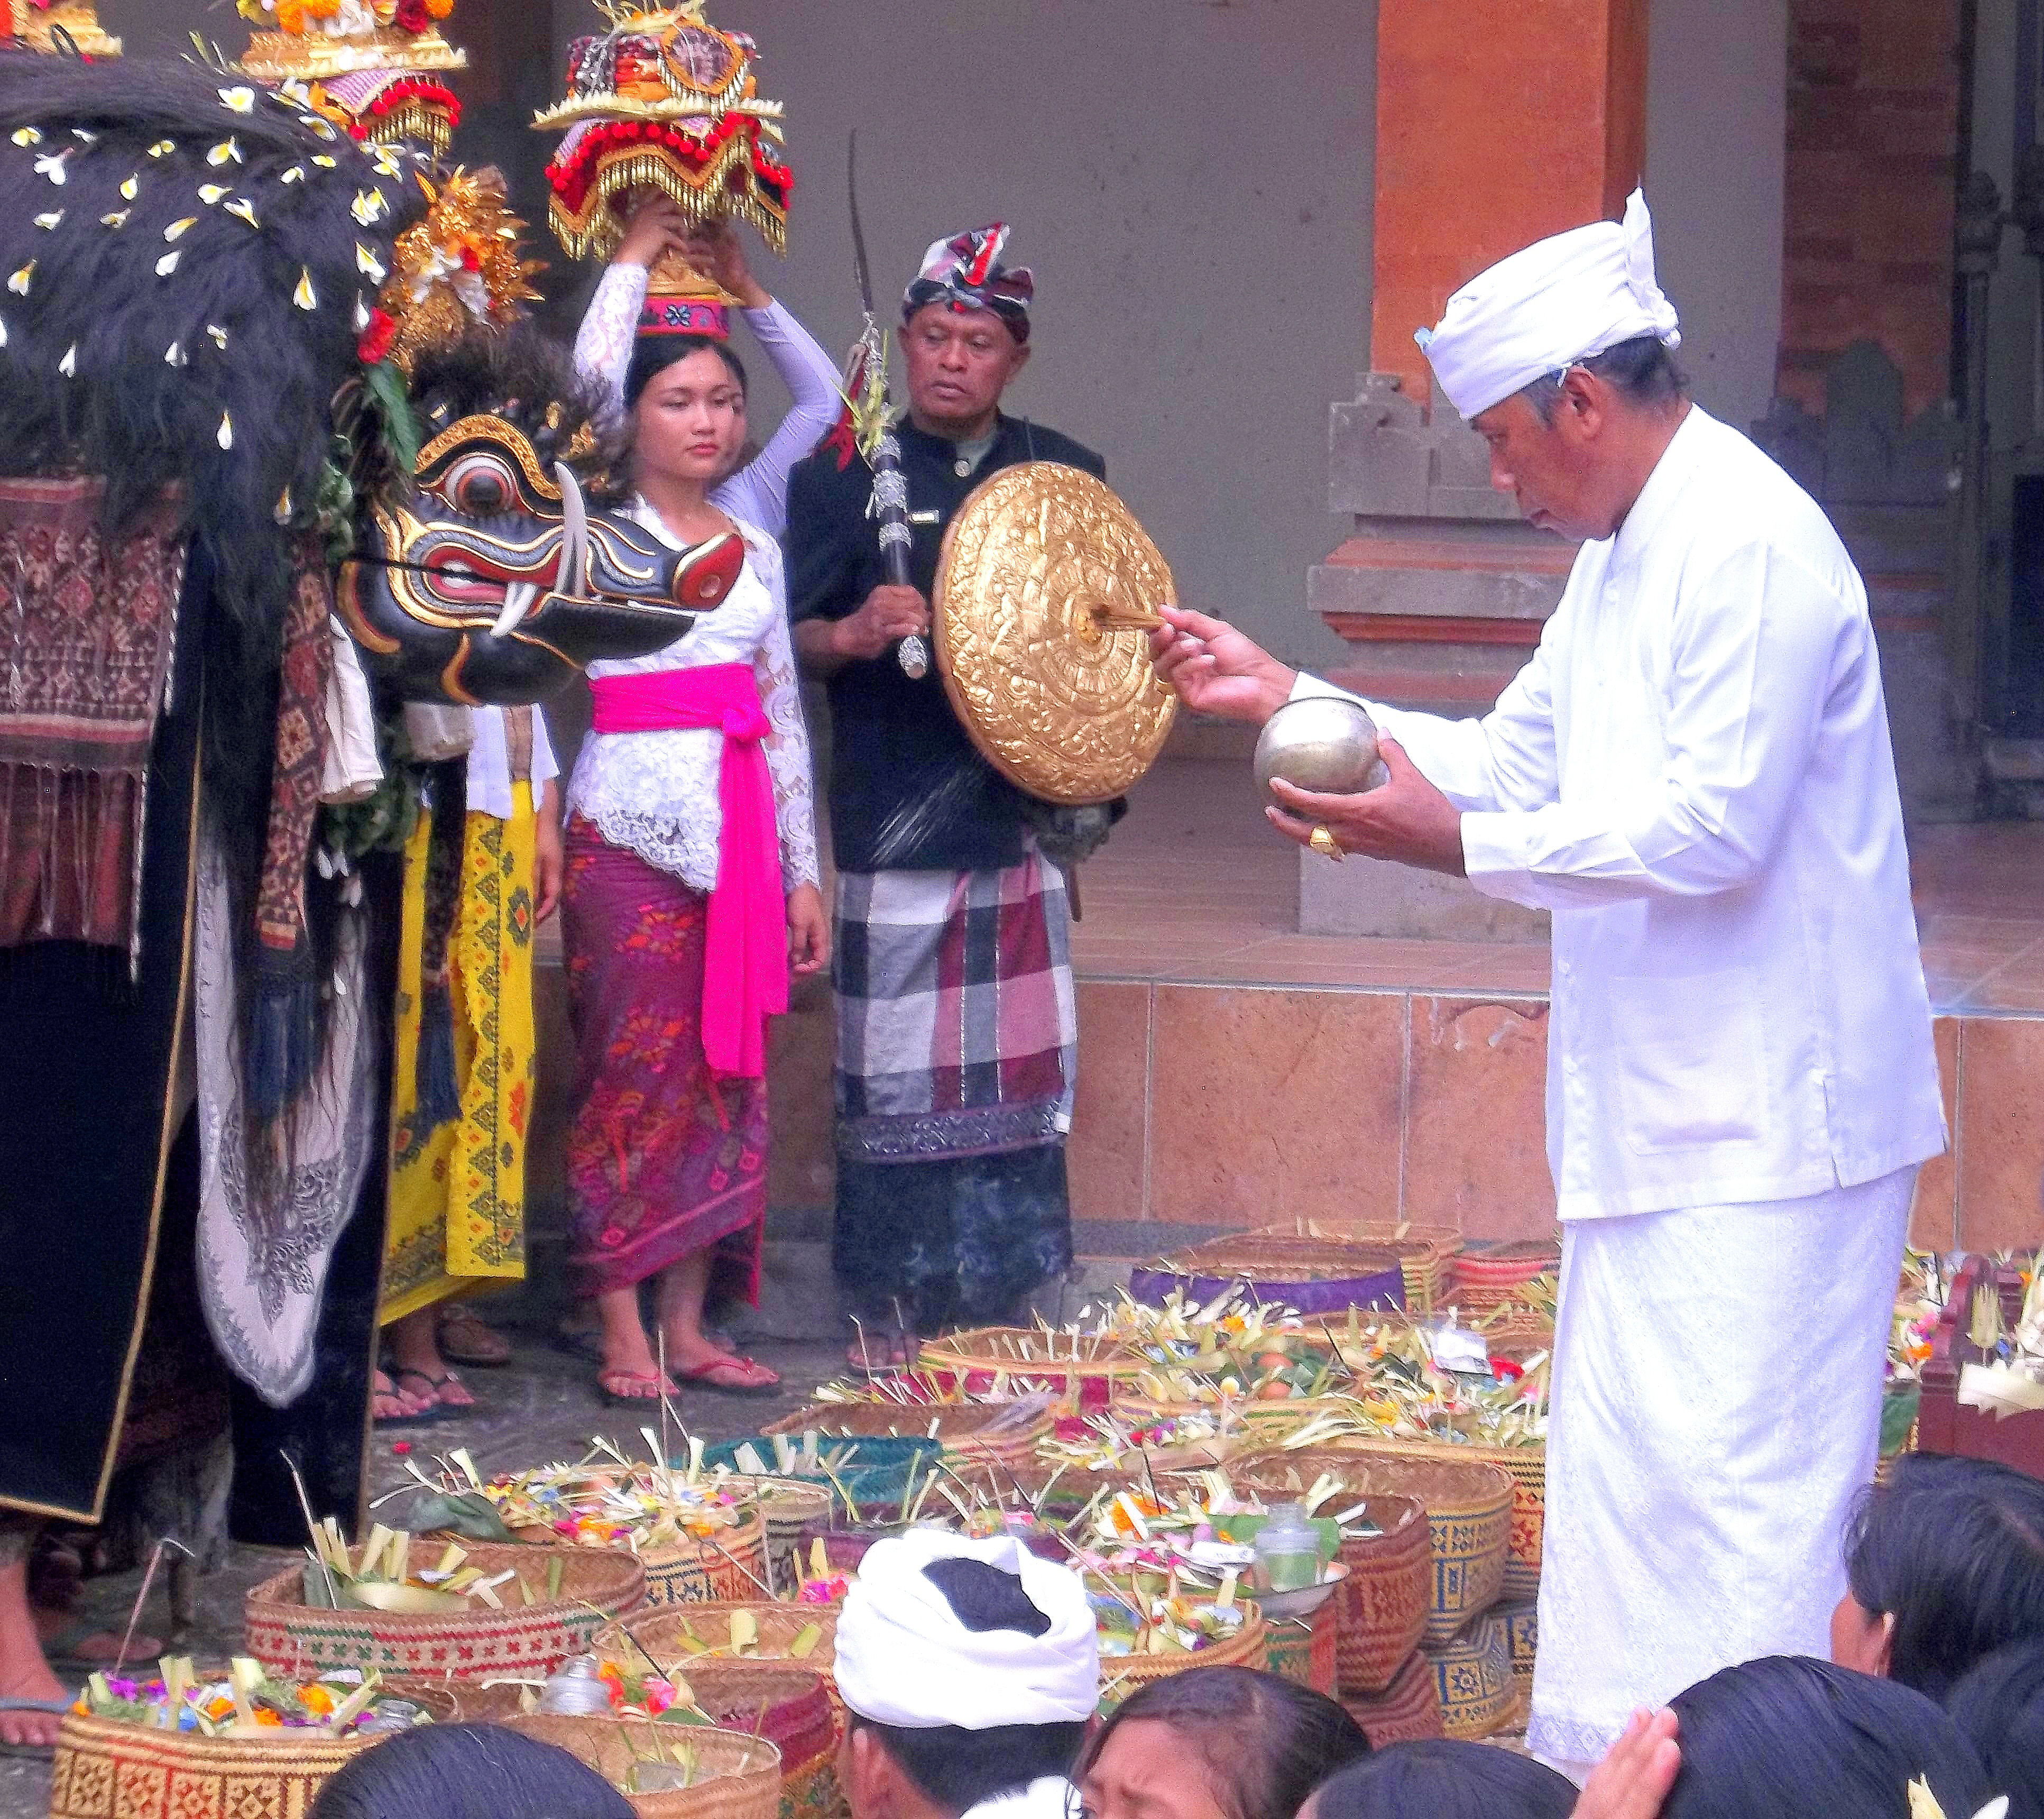 Brahmin Priest Conducting Rituals at a Village Religious Festival